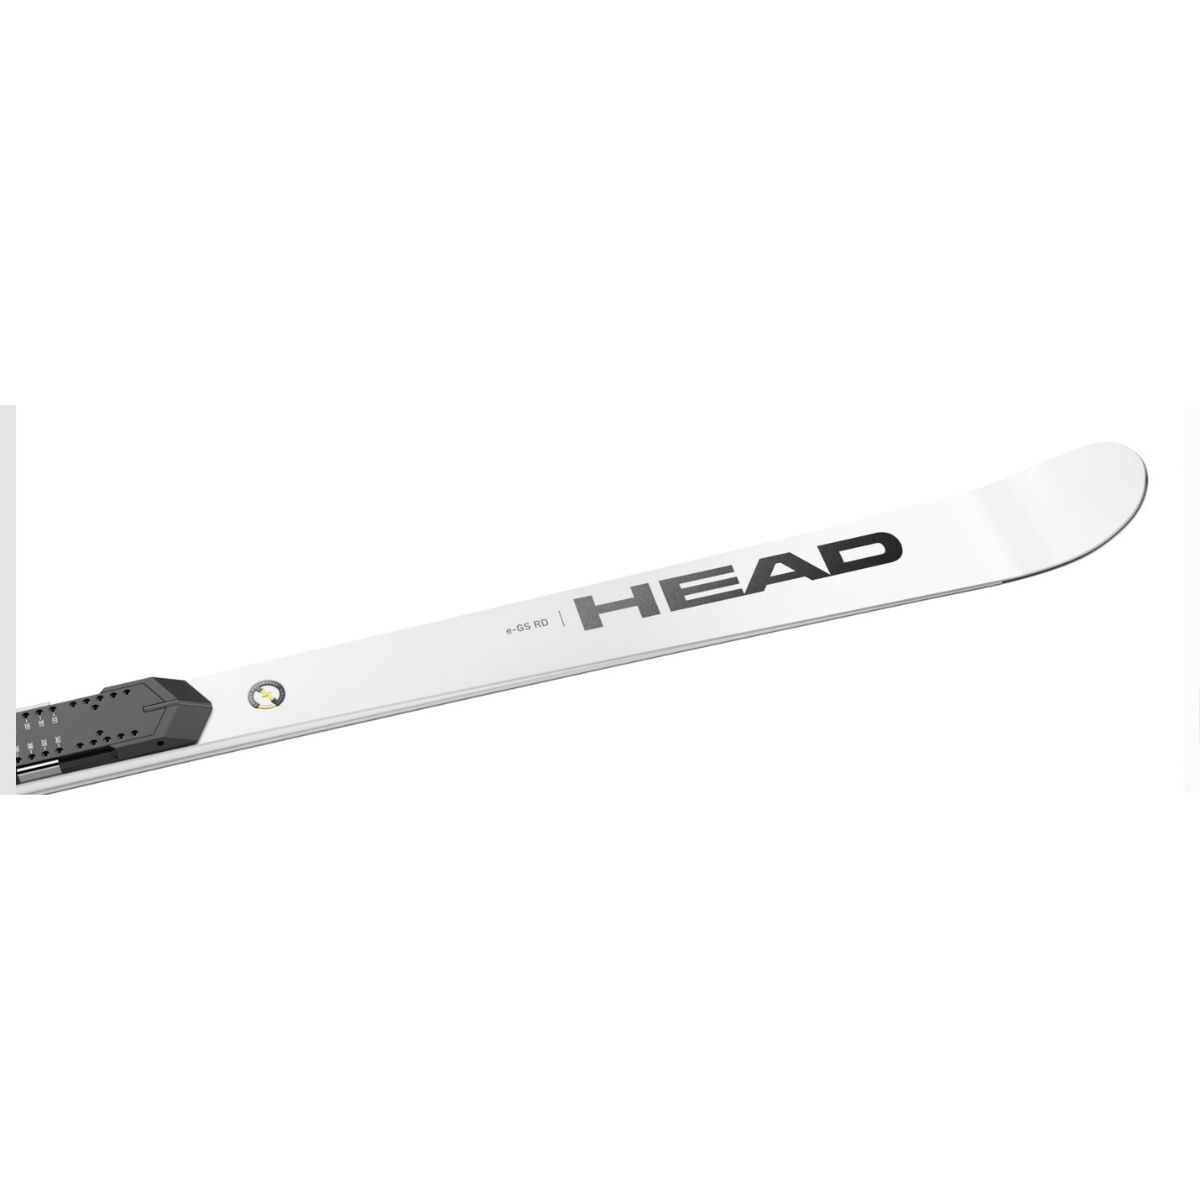 Head Worldcup Rebels e-GS RD Race Plate WCR 14 Skis | Christy Sports